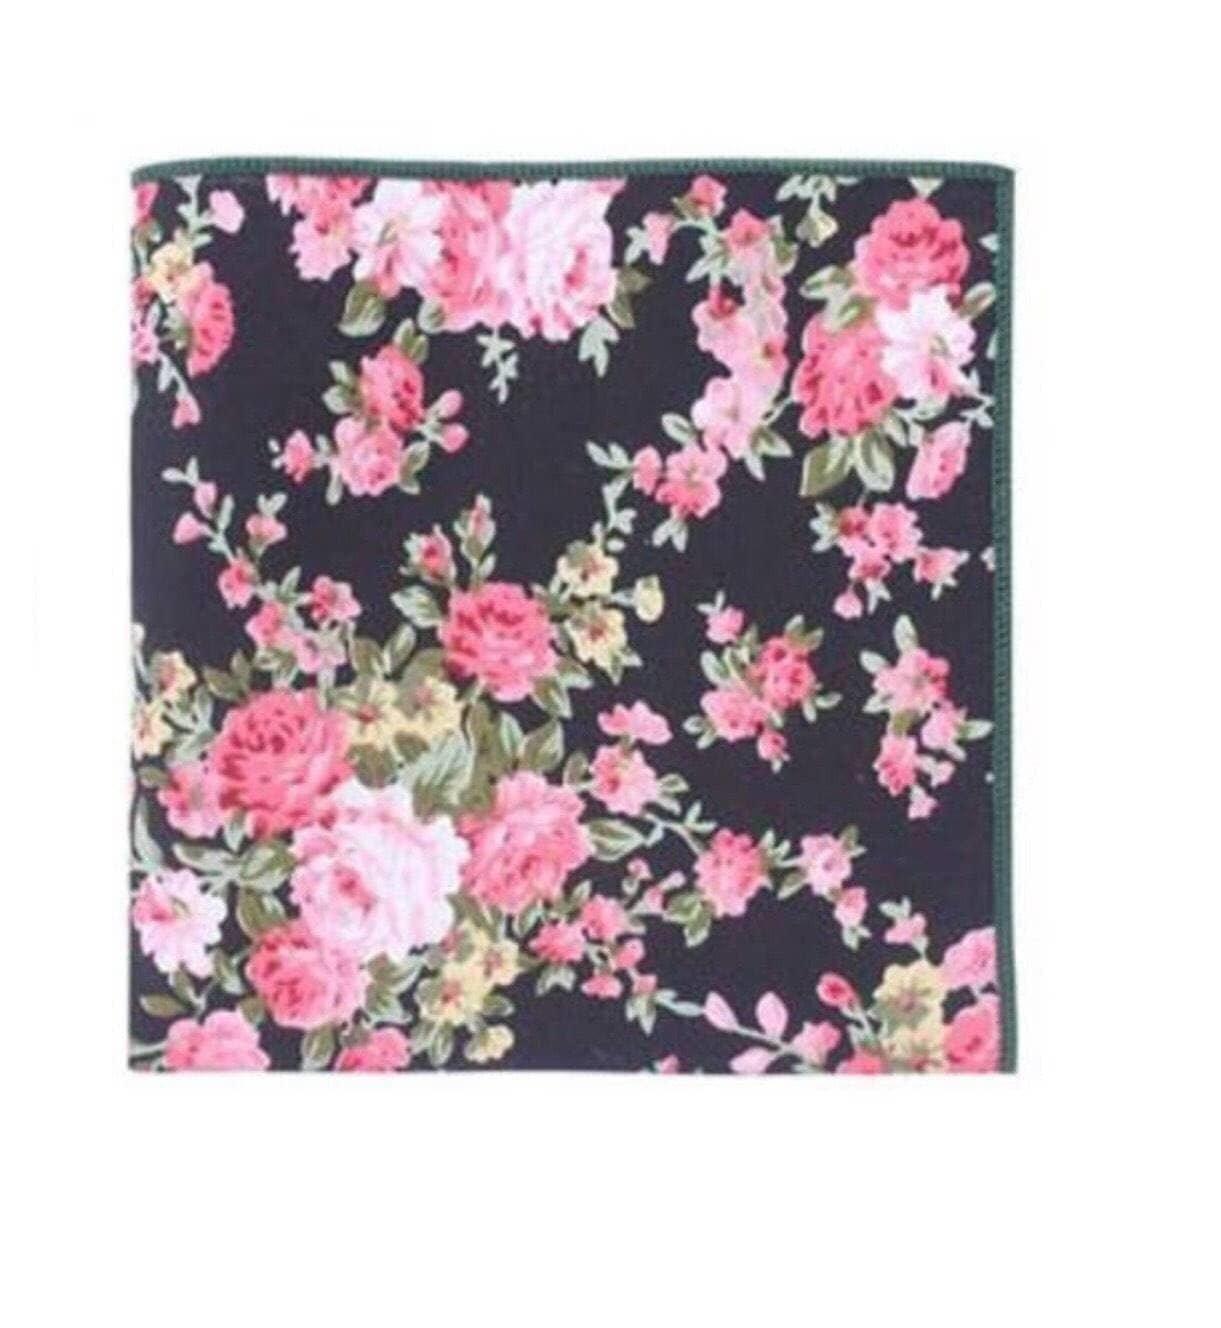 JOE Floral Pocket Square Mytieshop JOE Floral Pocket Square Class up your suit with this dapper floral pocket square. Printed with a tasteful floral design, this pocket square is perfect for dressing up your suit. It'll add some personality and style to your look, and it's a great way to show some personality. Made from high-quality materials, this pocket square is a must-have for any modern man.